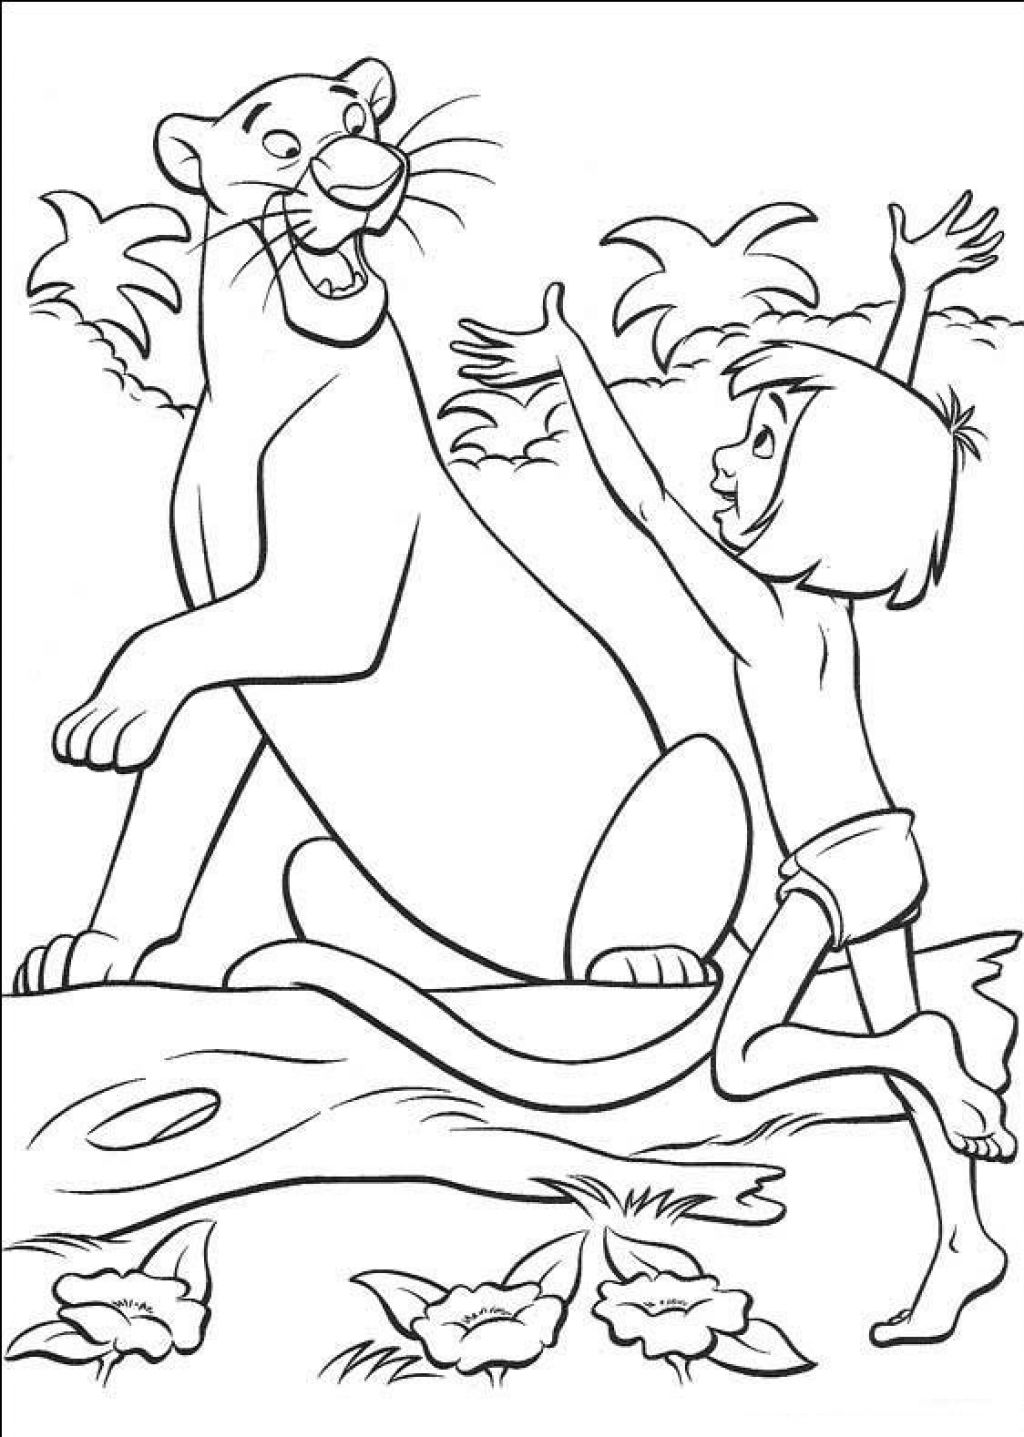 Jungle book to color for children   Jungle Book Kids Coloring Pages